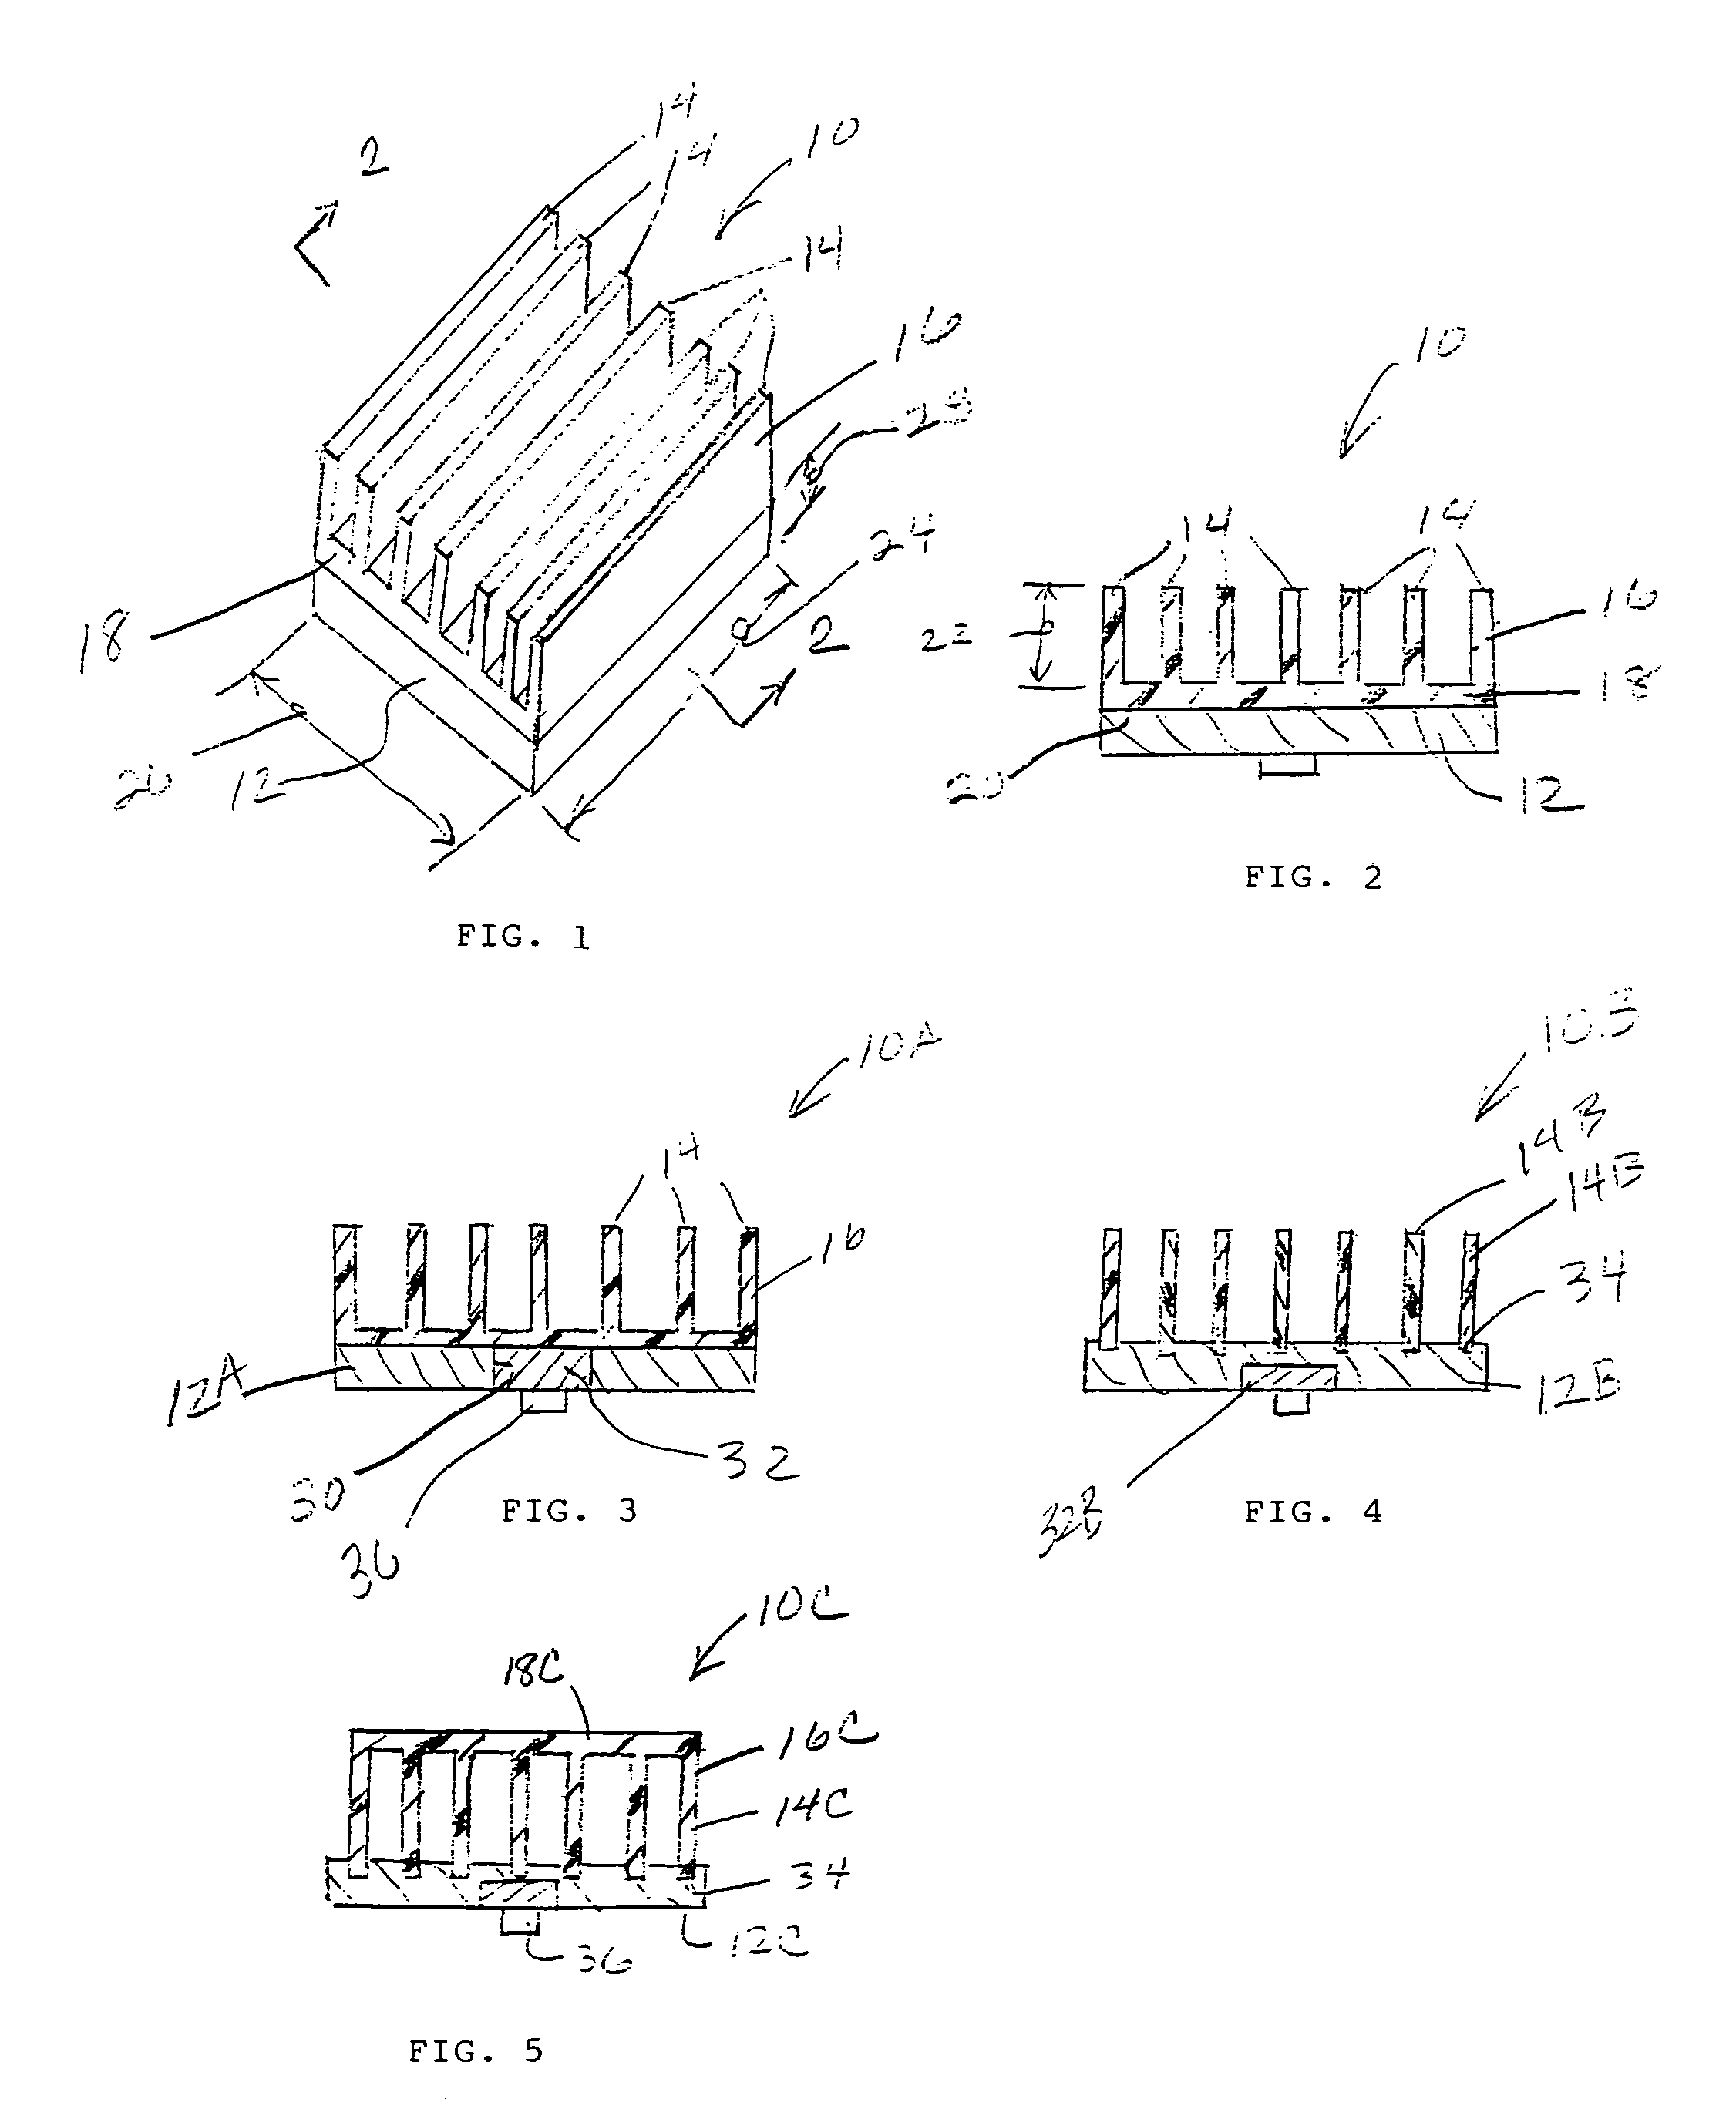 Optimized heat sink using high thermal conducting base and low thermal conducting fins